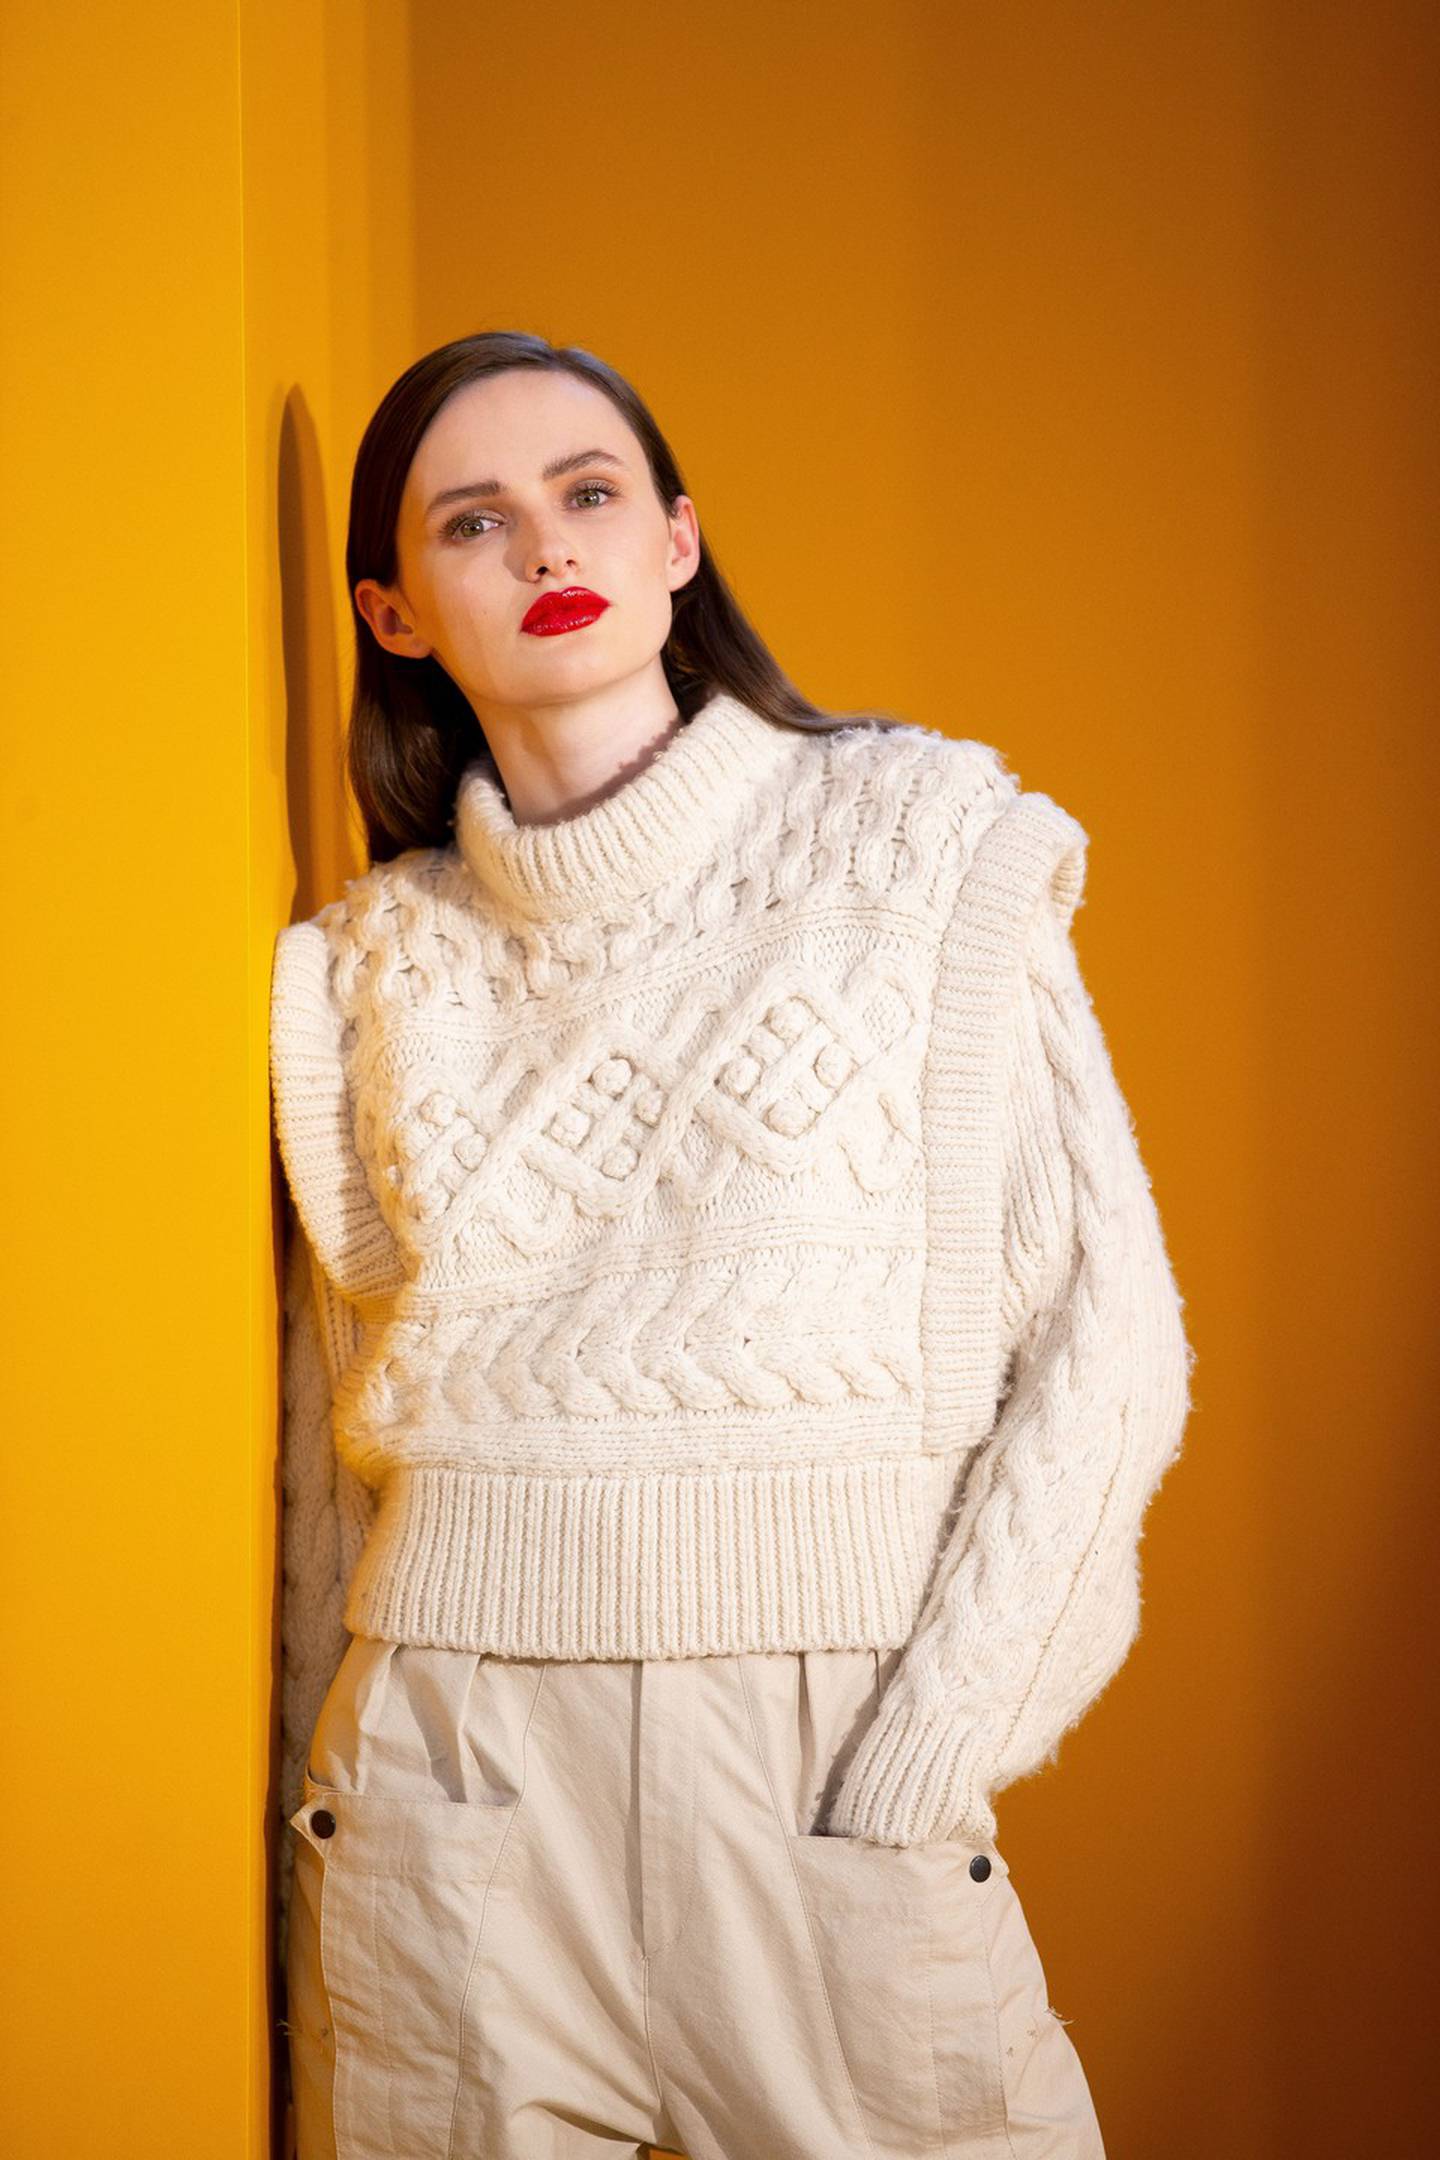 Brown Thomas a/w19: dramatic and diverse season showcased in Trinity’s ...